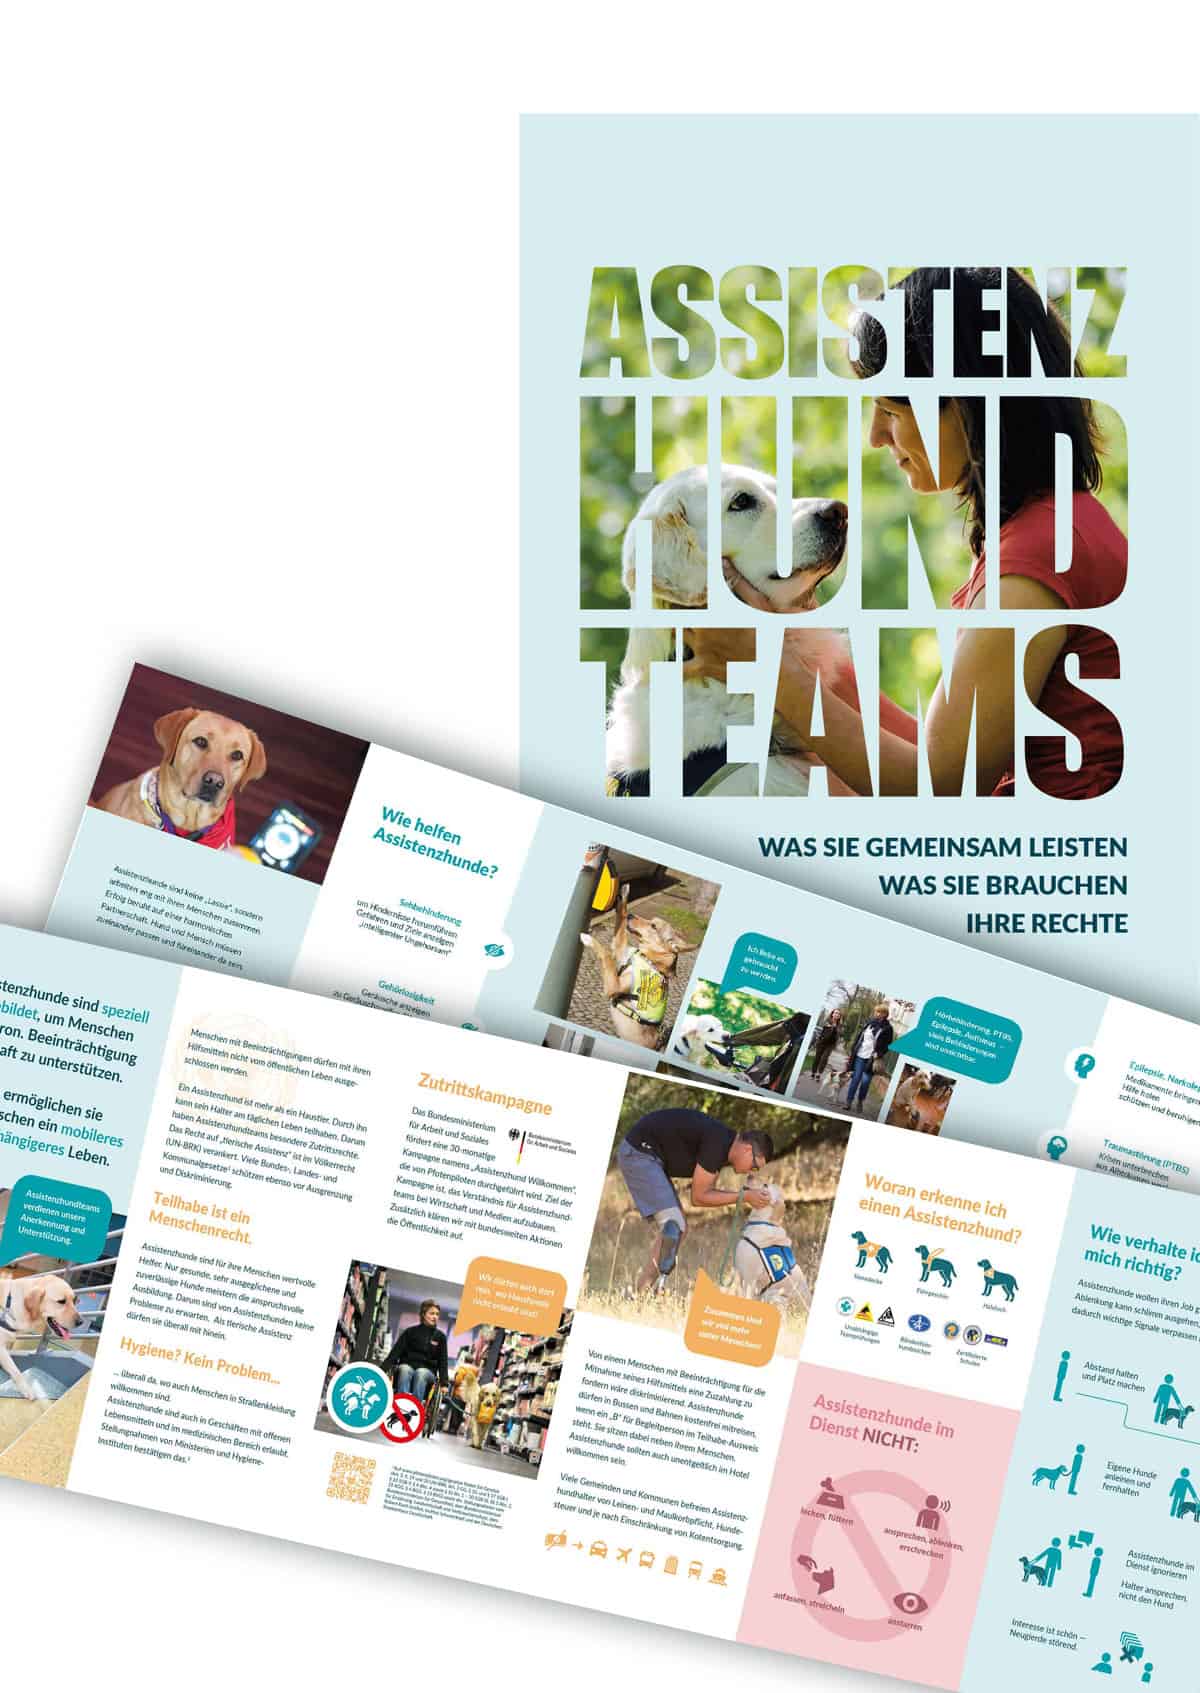 Info brochure assistance dog teams from the outside and inside